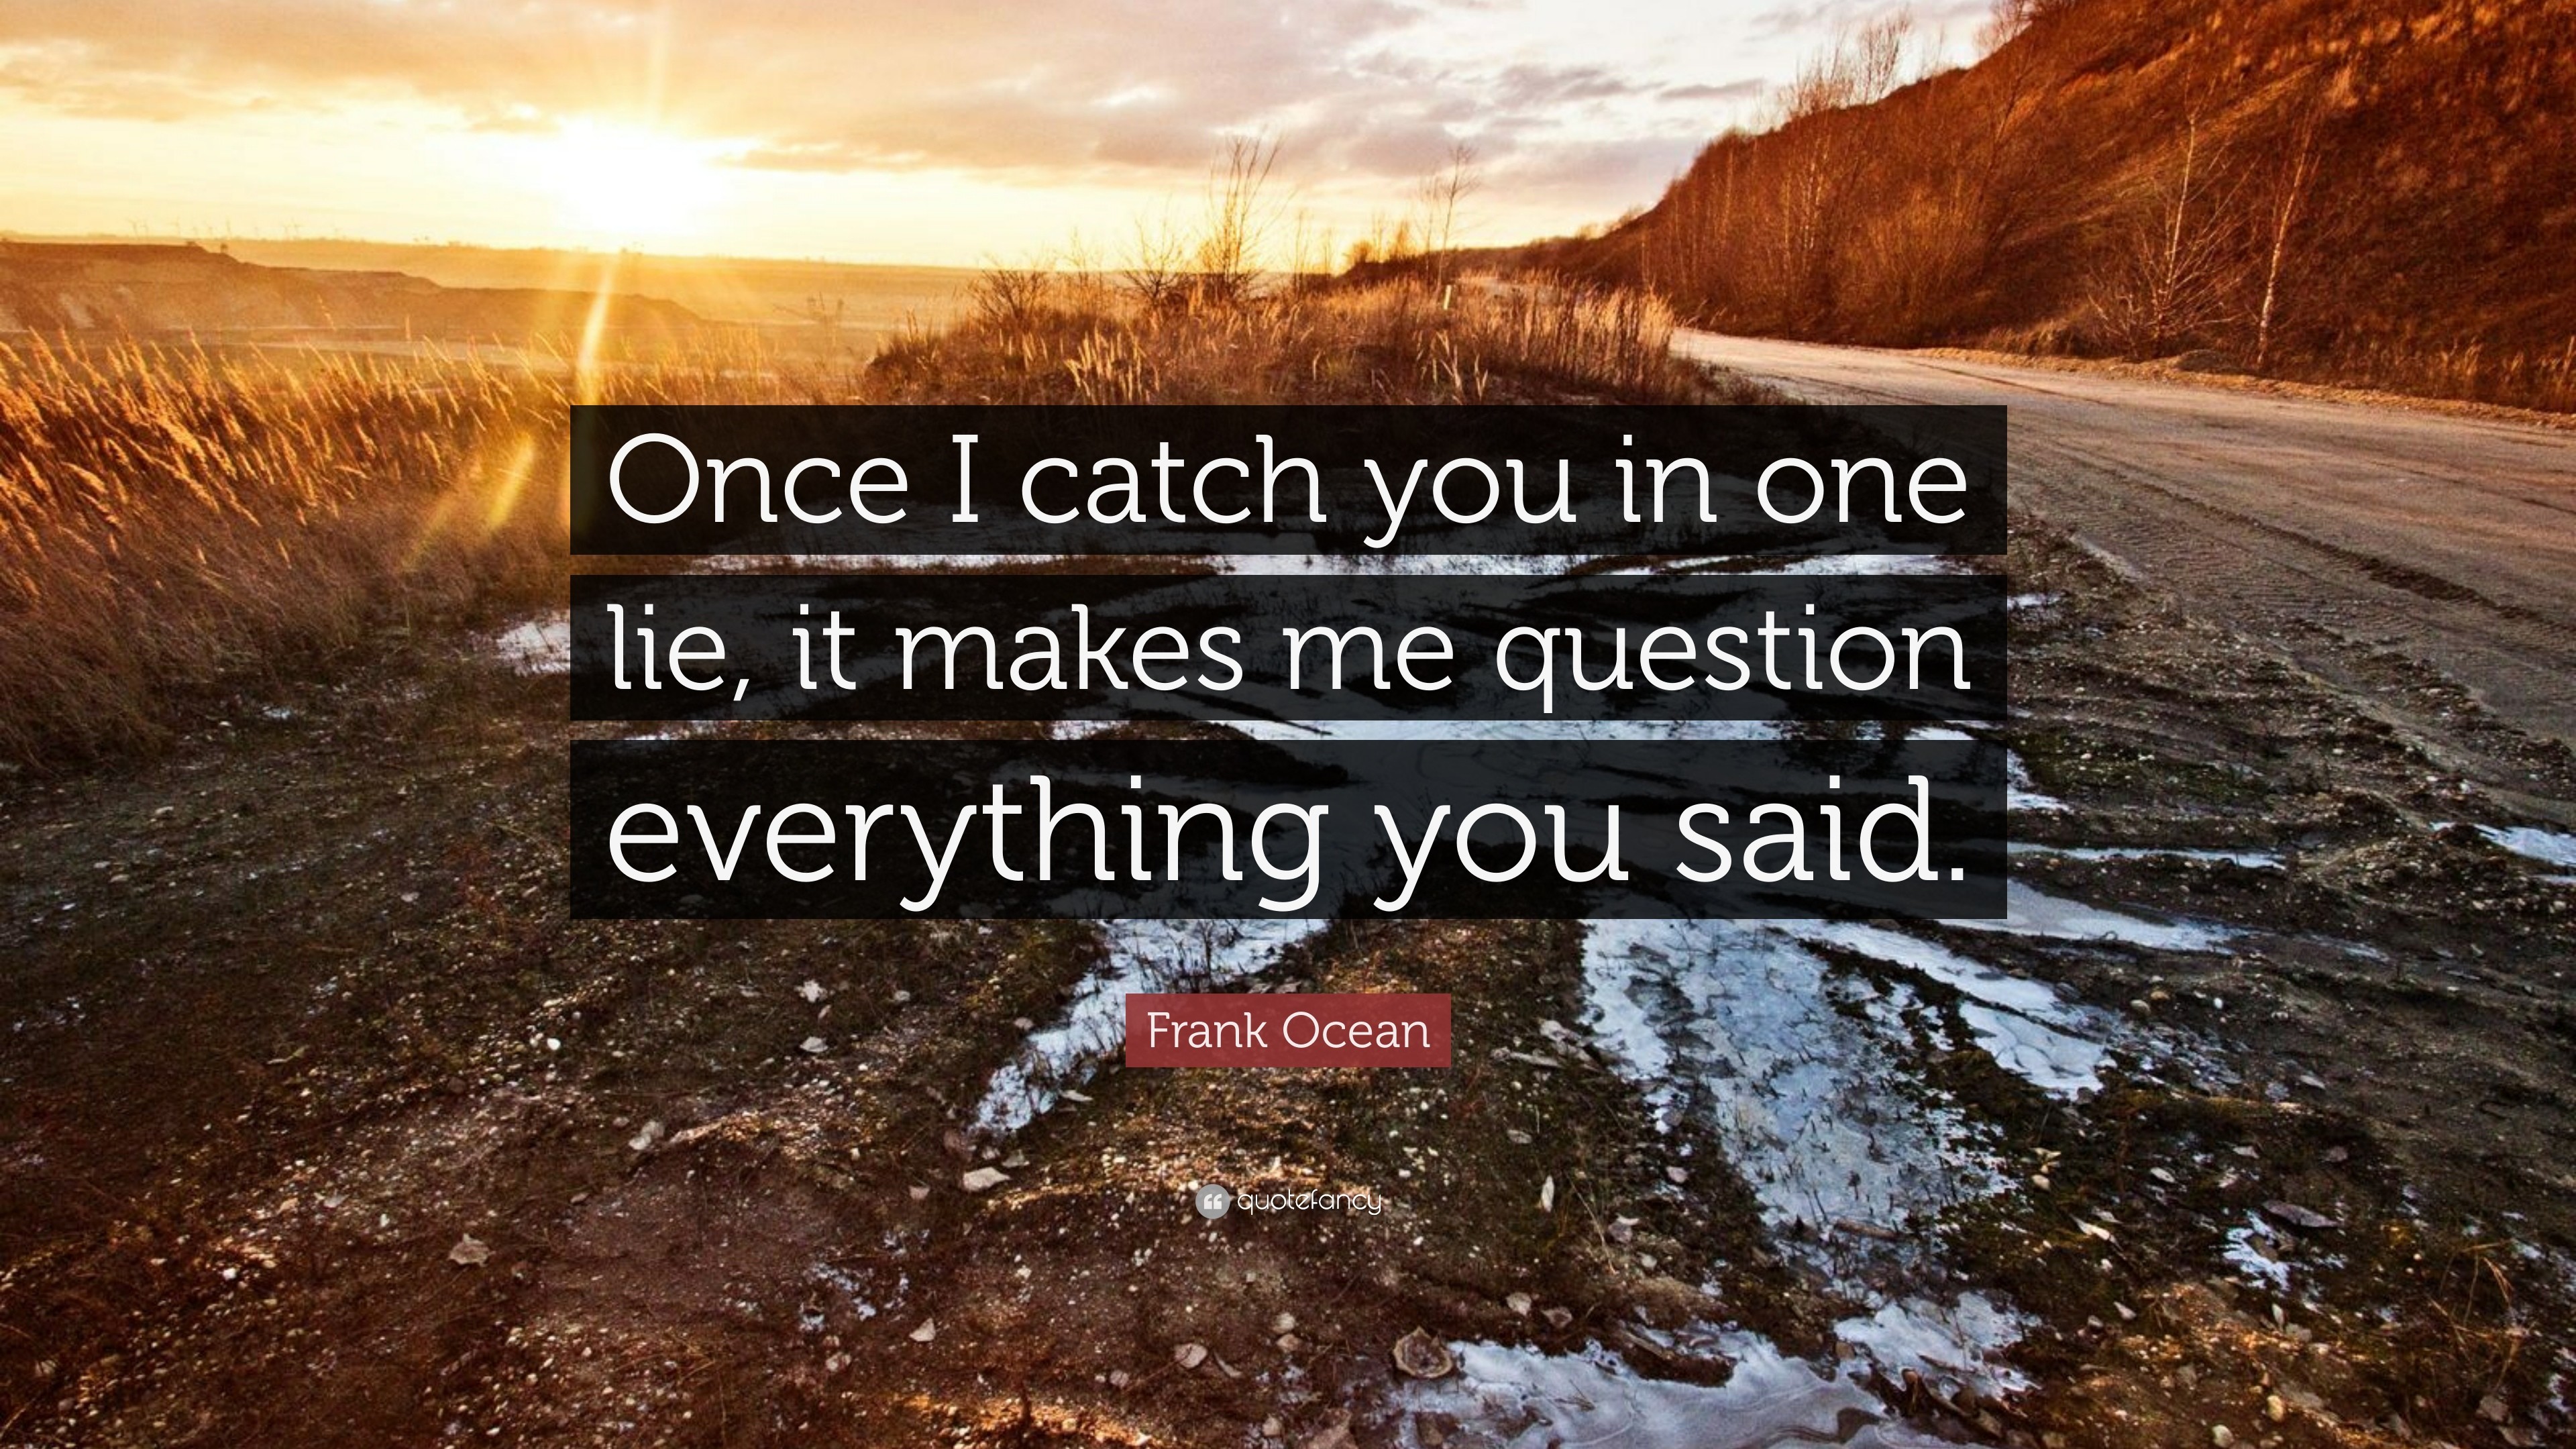 3840x2160 Frank Ocean Quote: “Once I catch you in one lie, it makes me